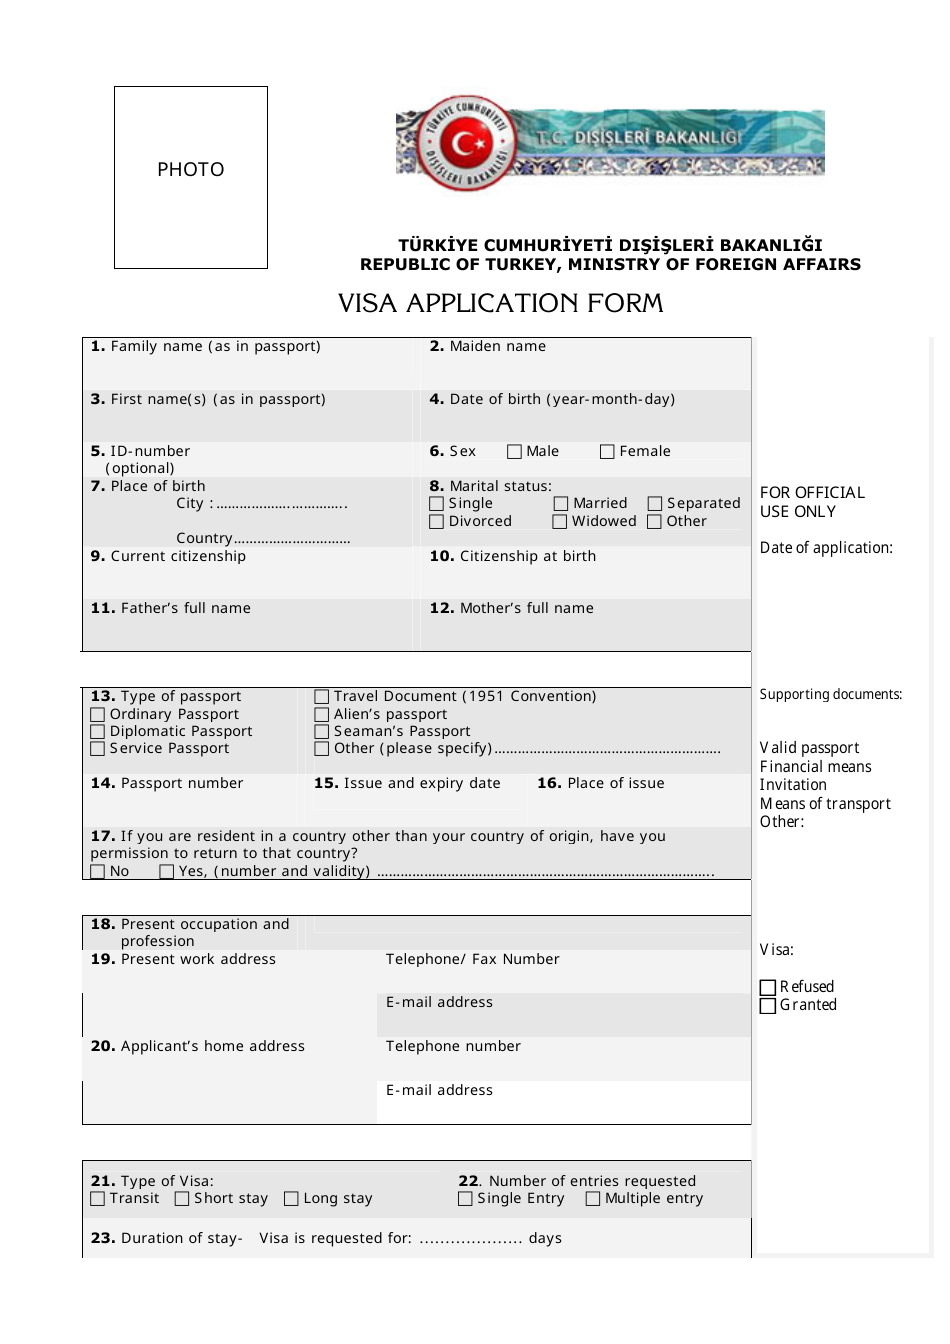 Turkish Visa Application Form - Fill Out, Sign Online and Download PDF